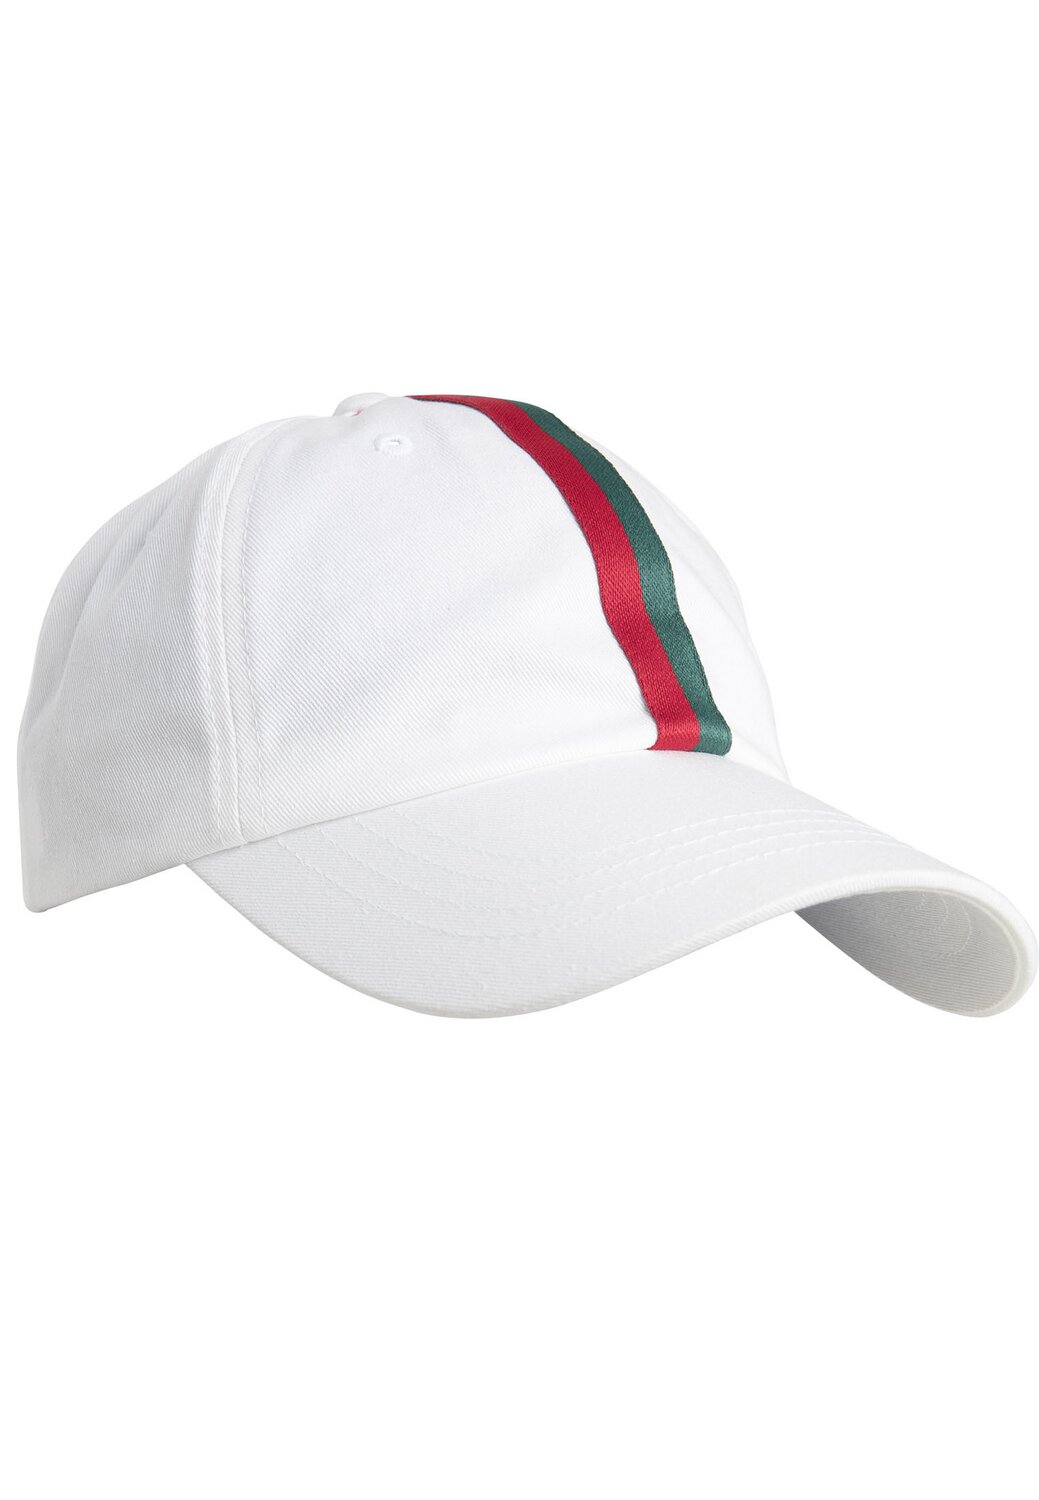 Dad Hat Stripe Flexfit white/fire MAXISCOOT | red/green